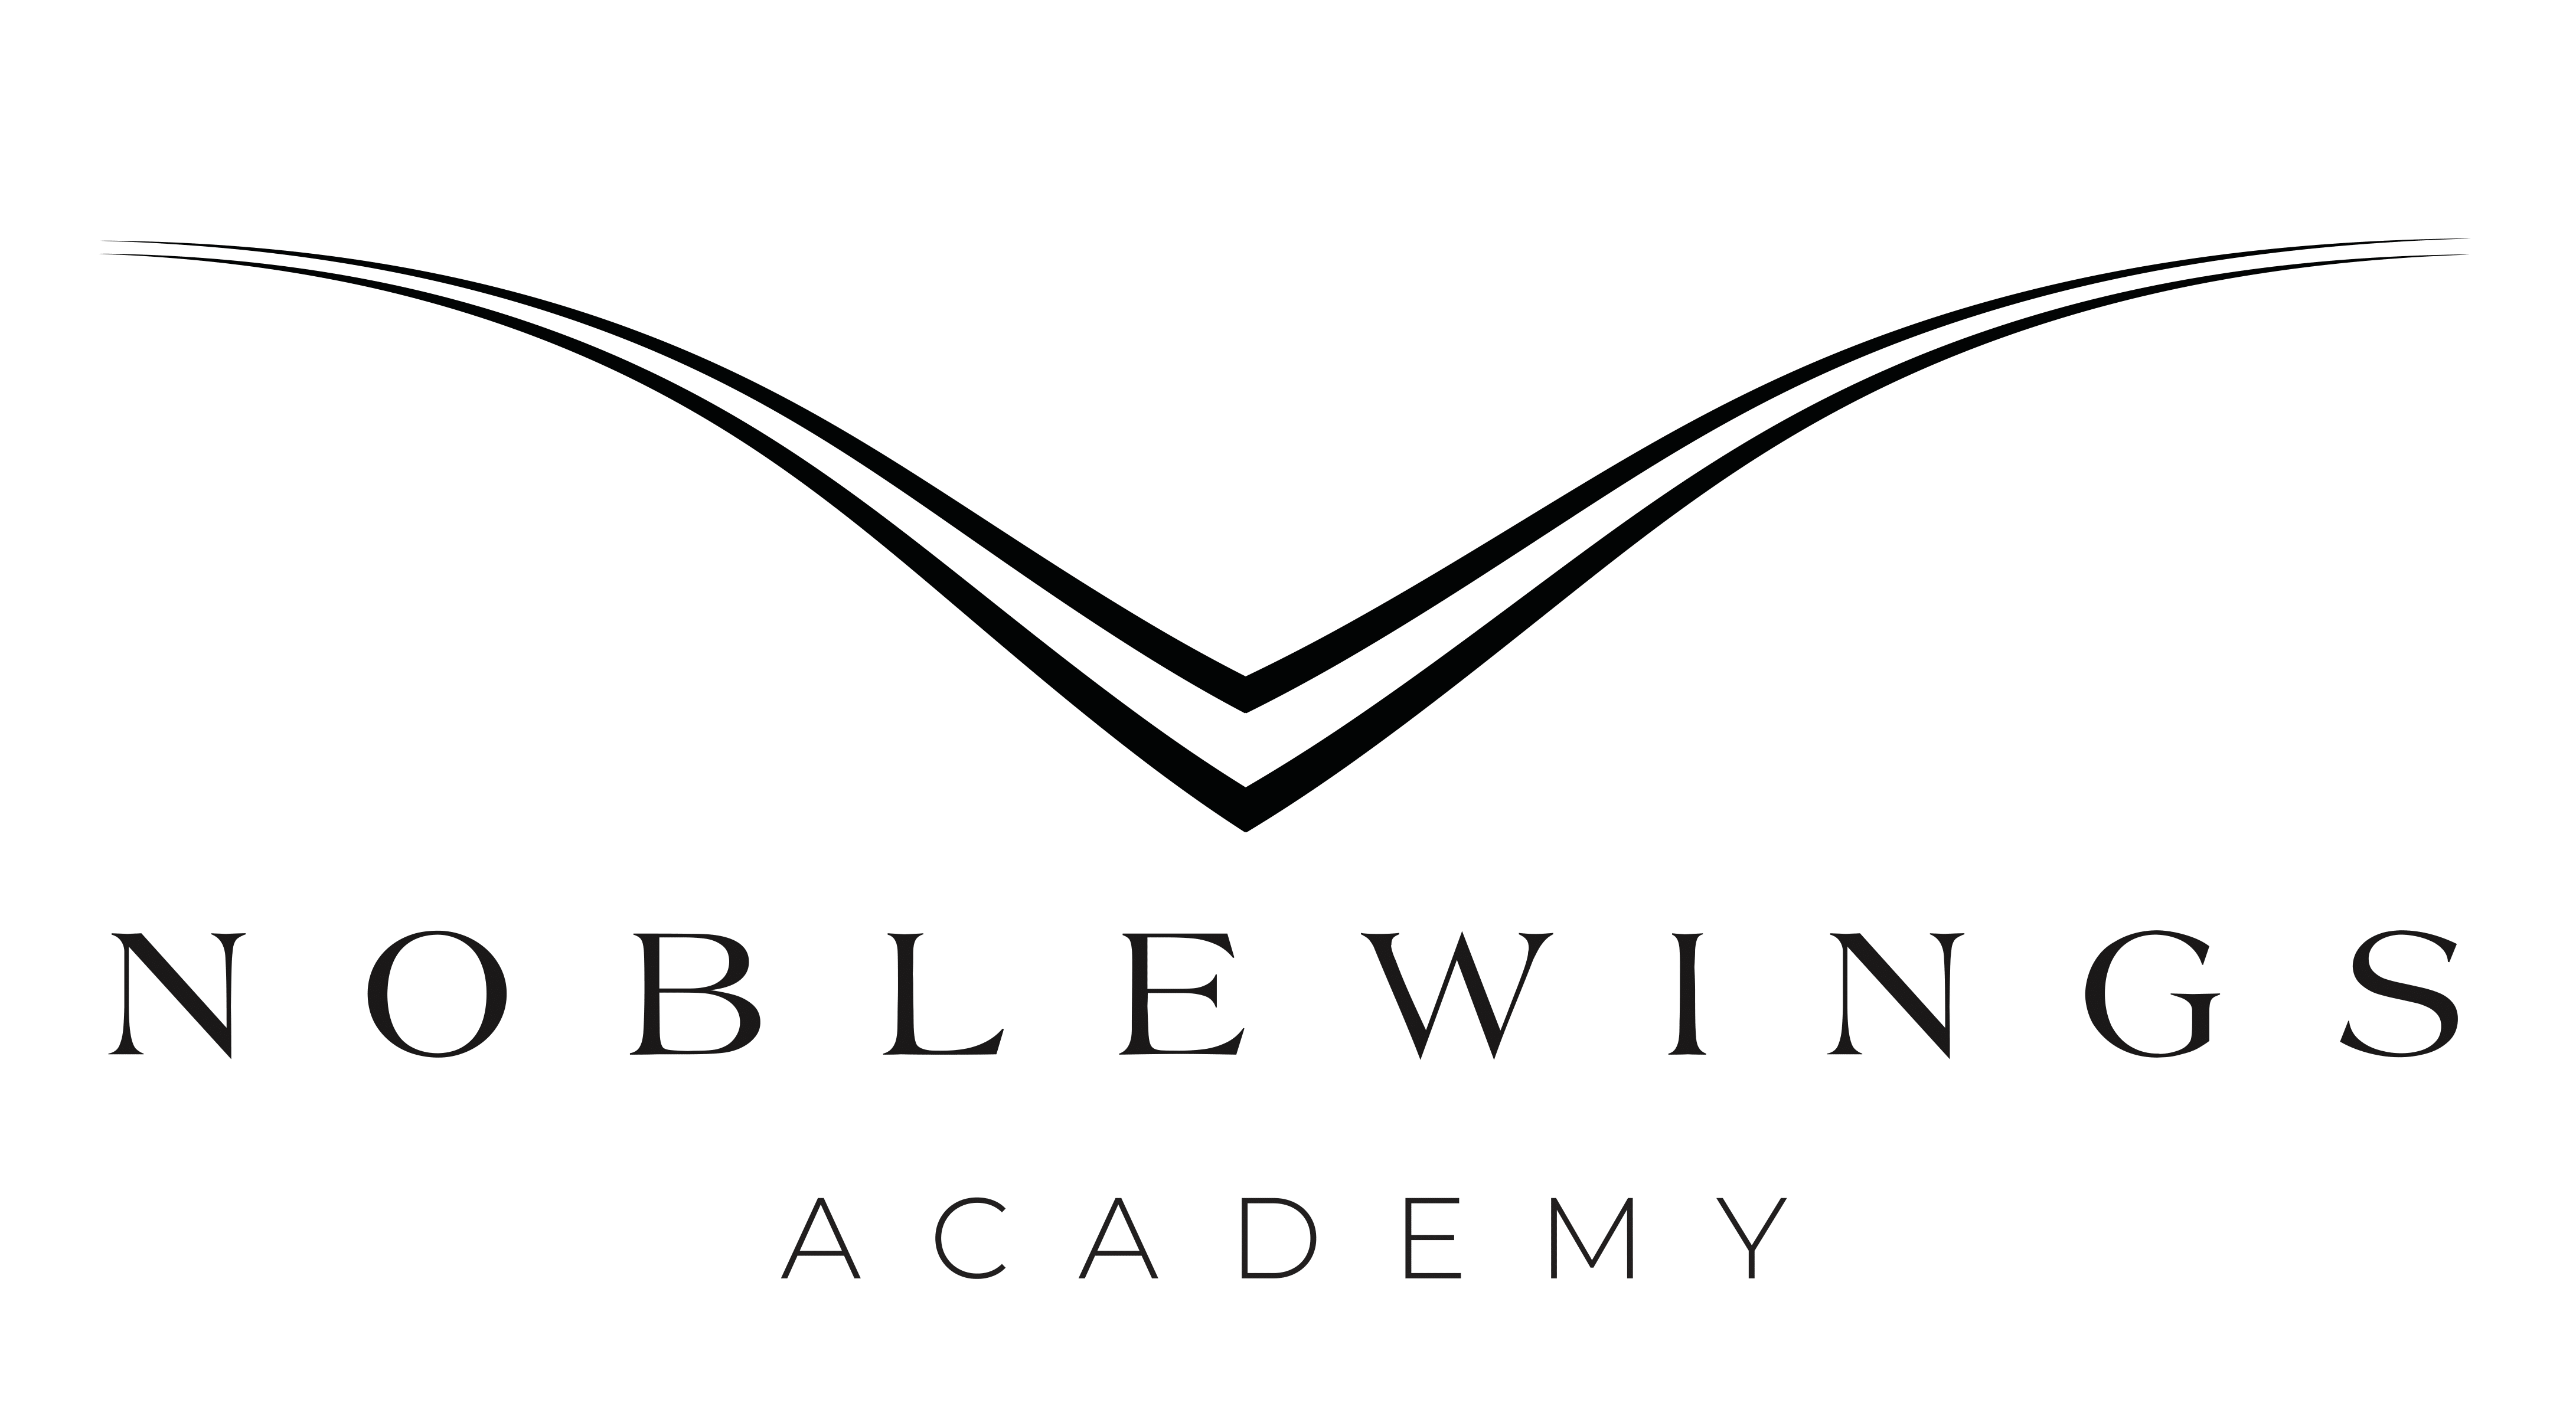 Noble Wings Academy